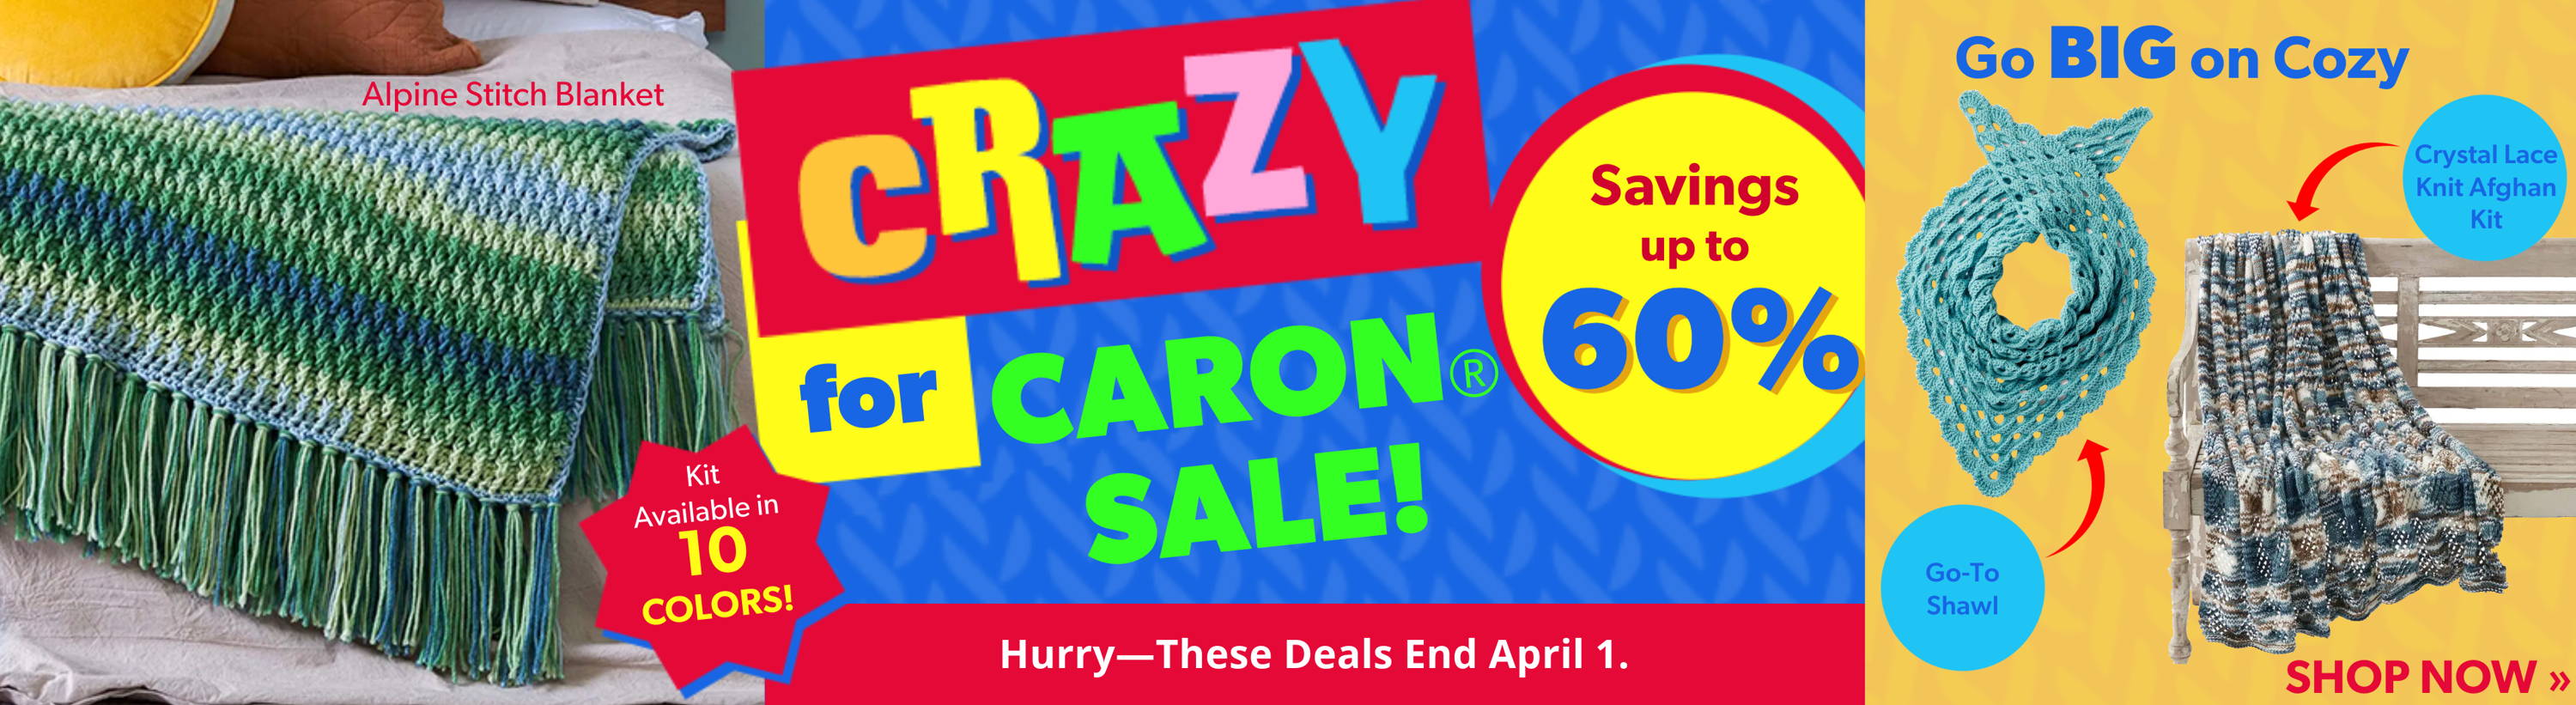 Crazy for Caron® Sale! Save up to 60% until April 1. Images: Caron ® Yarns projects.